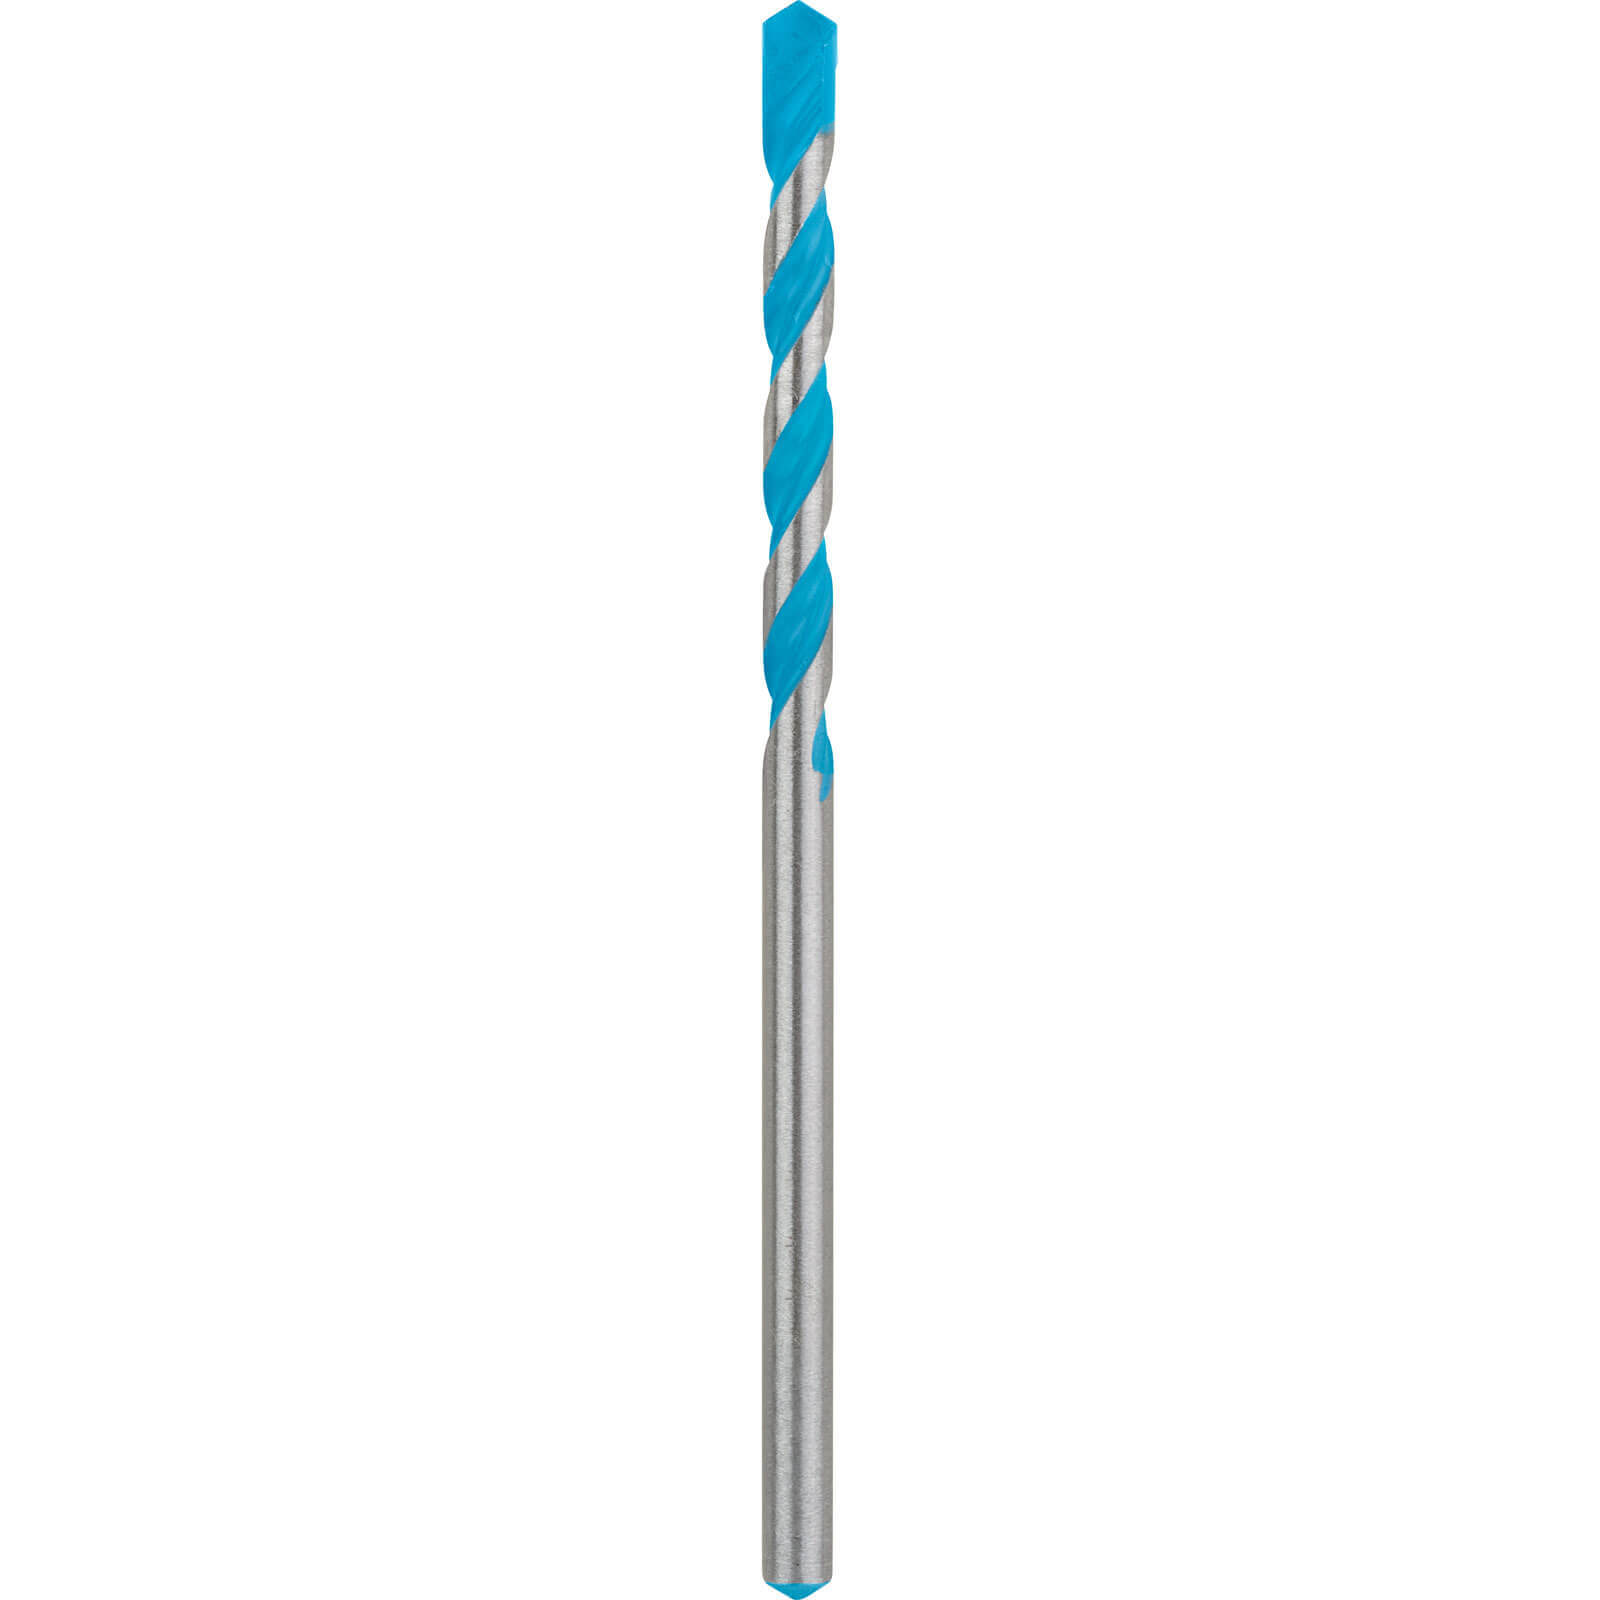 Photo of Bosch Expert Cyl-9 Multi Construction Drill Bit 3.5mm 70mm Pack Of 1